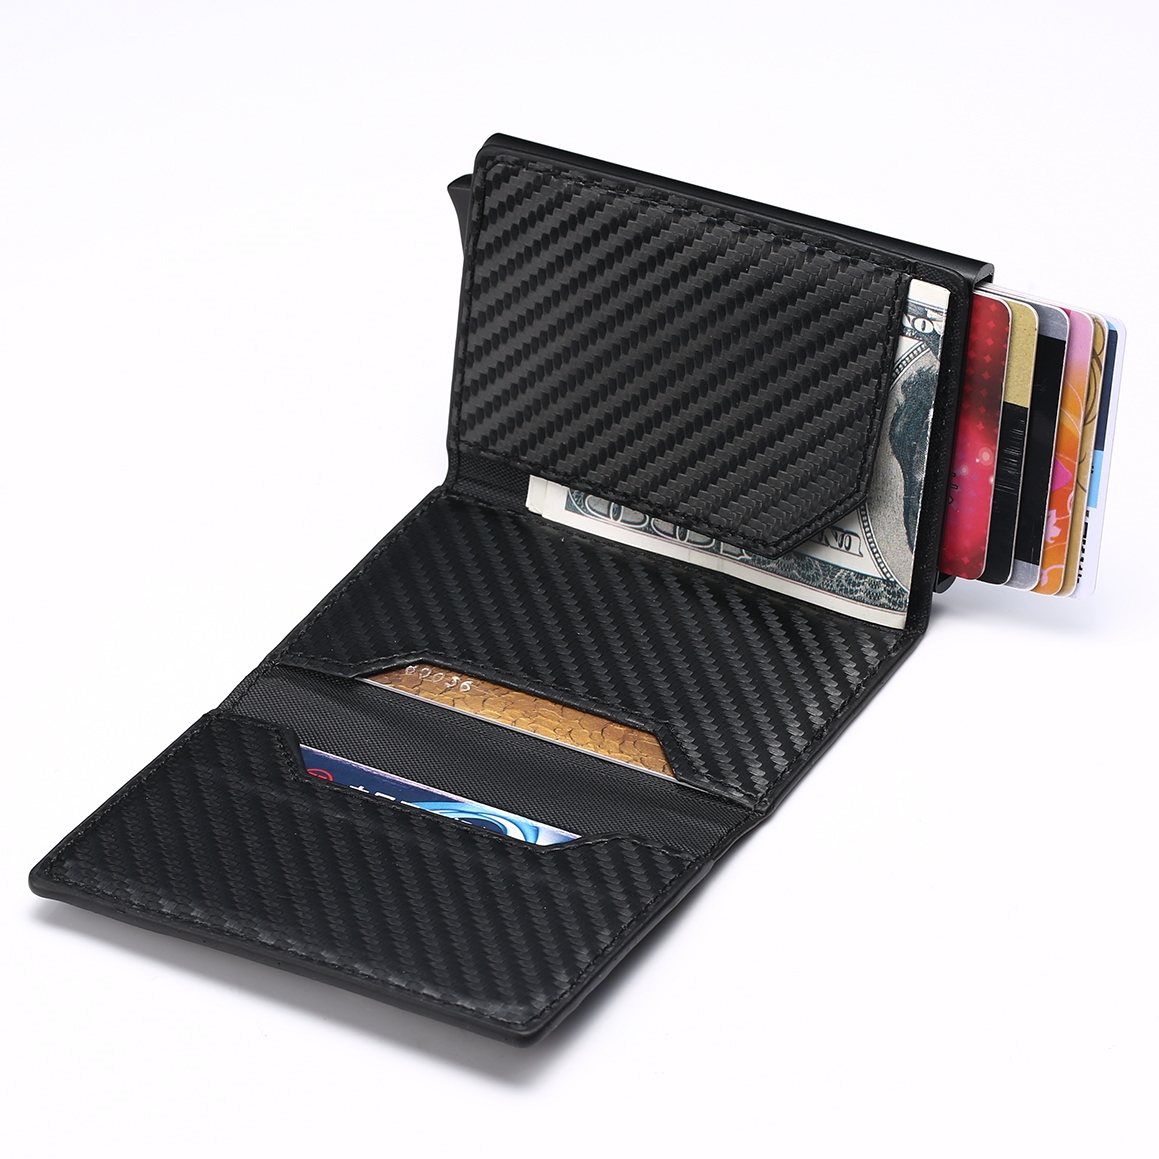 WALLET Aluminum Wallet With PU Leather And Zipper - Blue | Wallets Online